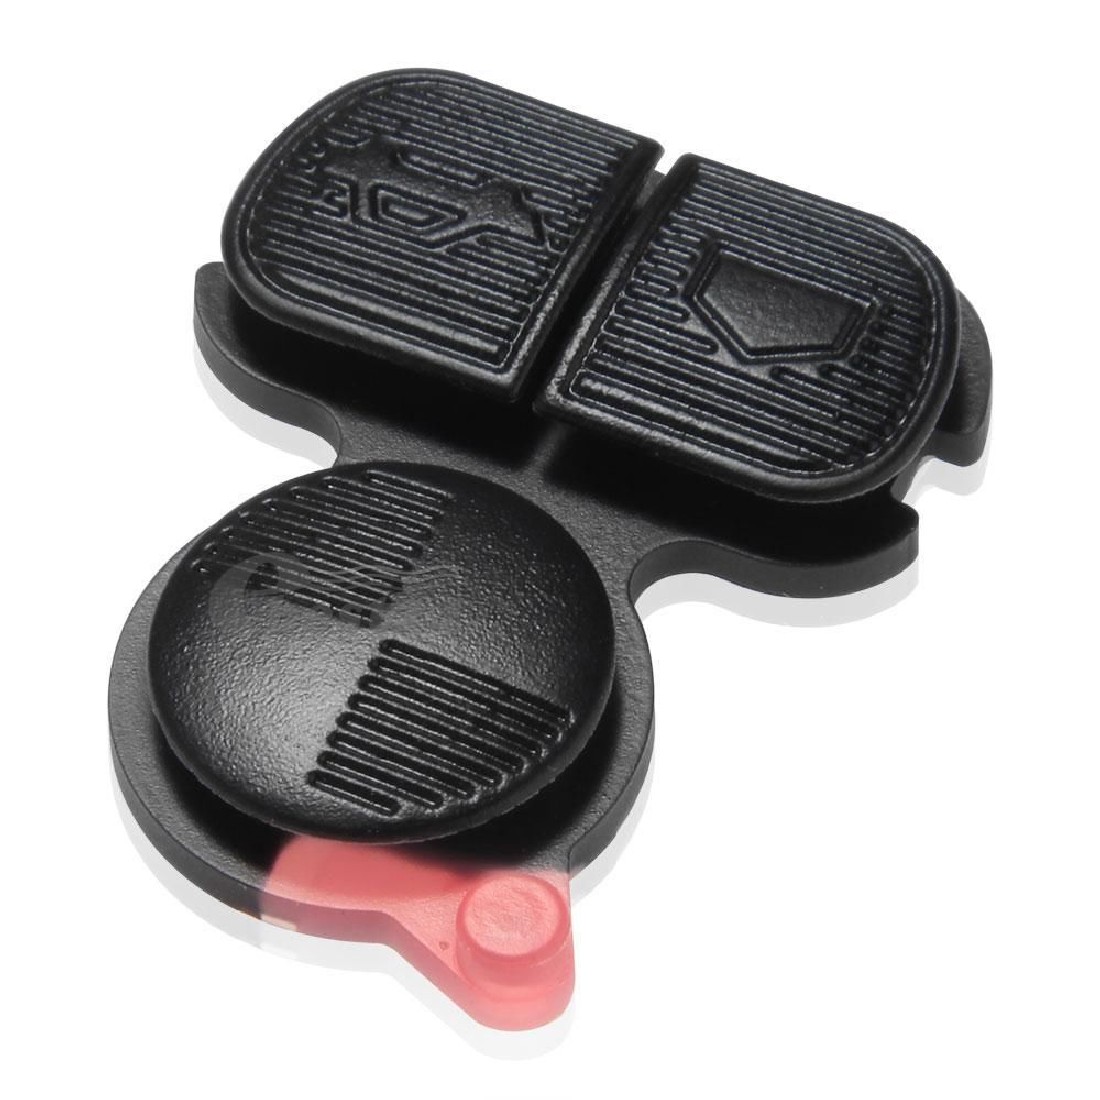 Image of 2015 new Black Replacement Entry Remote Key Fob Shell Case Housing 3 Buttons for BMW E46 Z3 E36 E38 E39 Wholesale